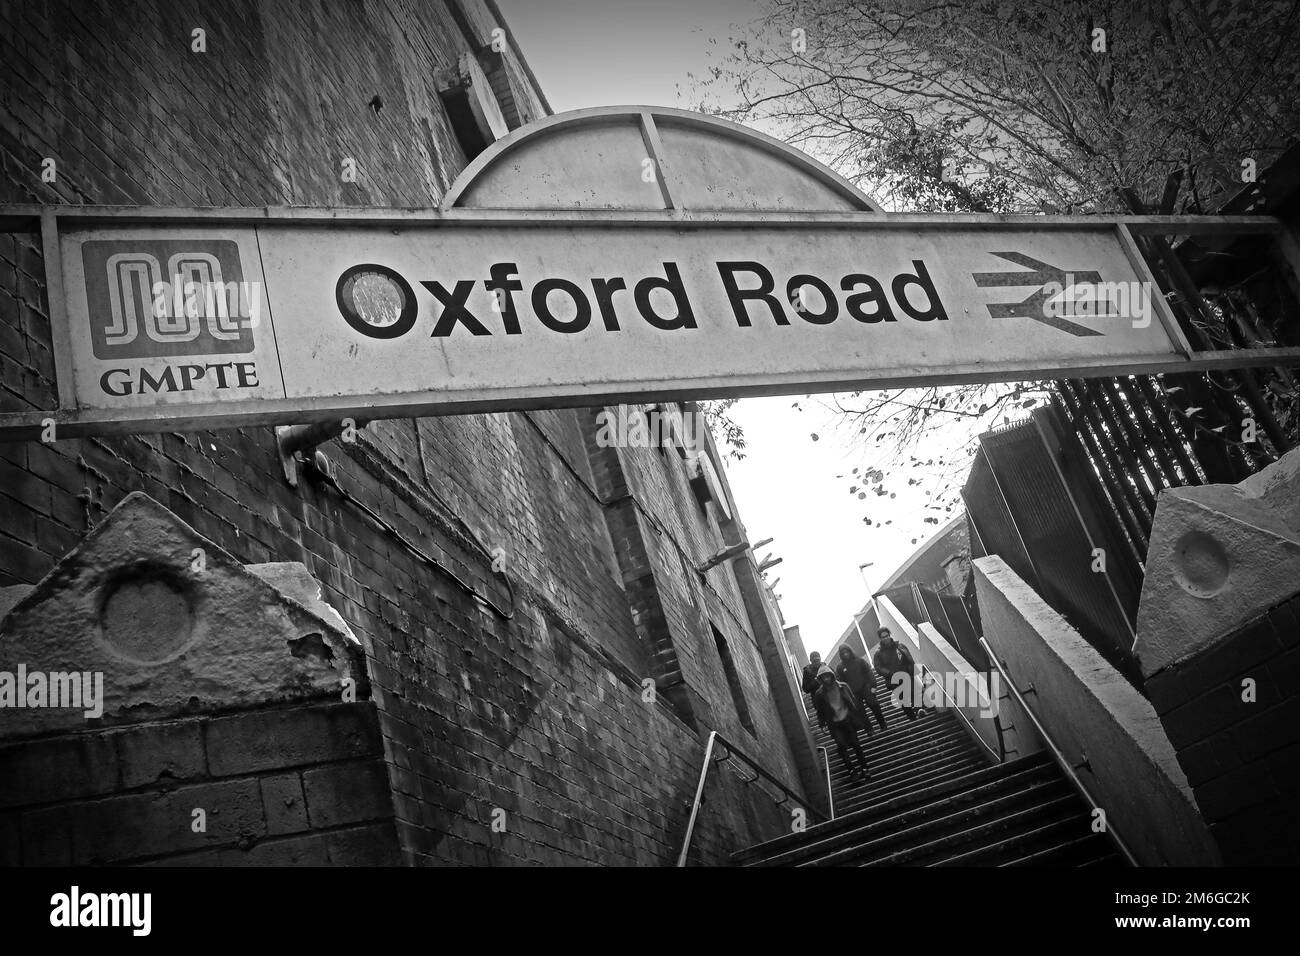 BW image of the entrance of Oxford Road GMPTE British rail station, Manchester, England, UK, M1 6FU Stock Photo